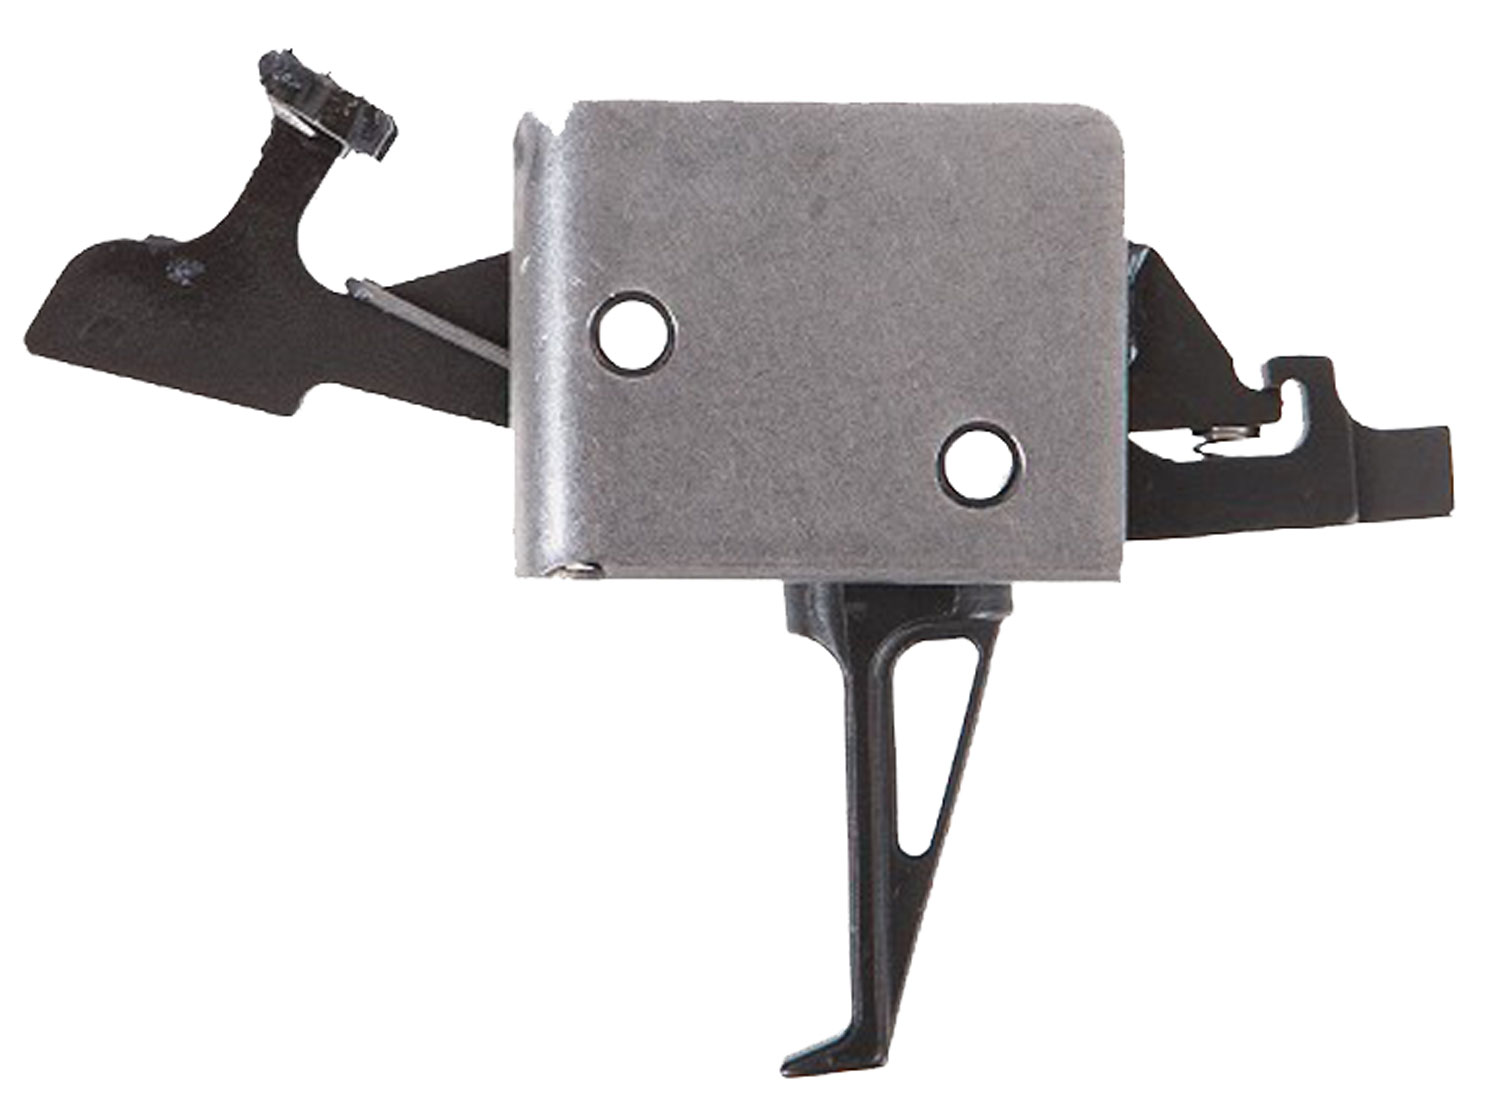 CMC Triggers 91504 Drop-In  Two-Stage Flat Trigger with 1-3 lbs Draw Weight & Black/Silver Finish for AR-15/AR-10